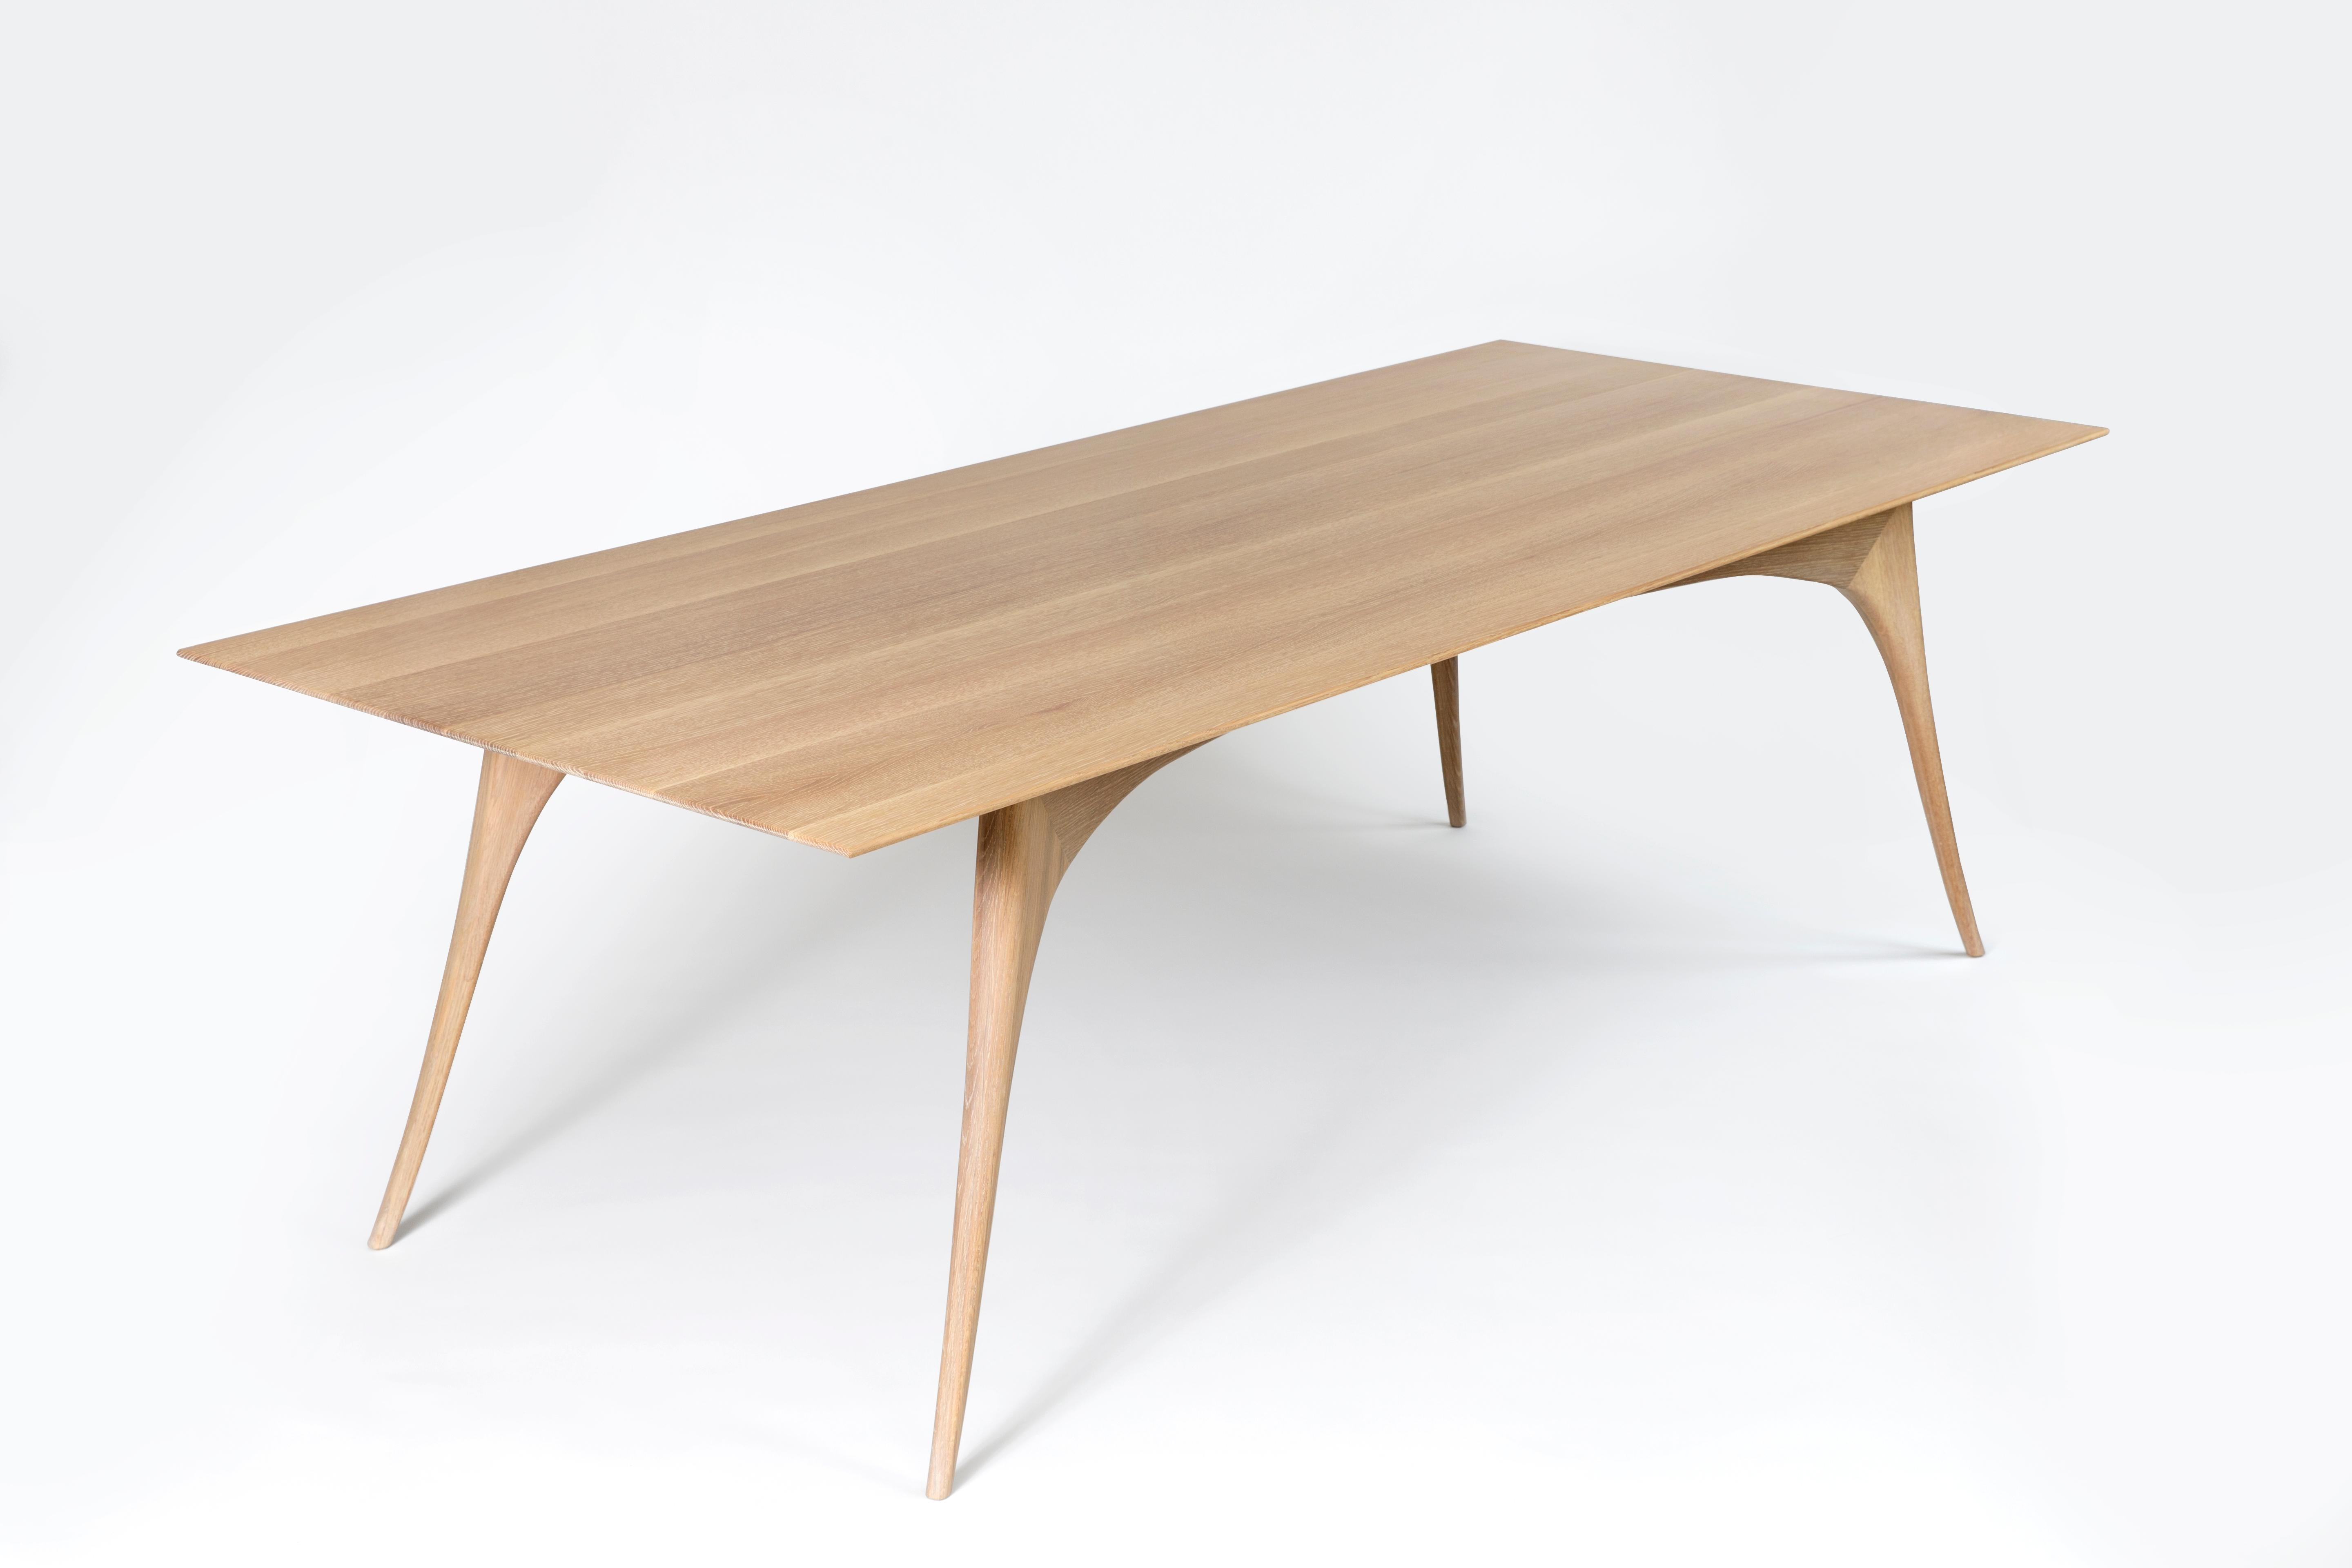 The Gazelle Dining Table in rift-cut white oak is featherlight in appearance, the whisper-thin wood surface floats atop graceful, curved legs that have been shaped by hand. The simplicity of this solid wood table's design belies its elaborate